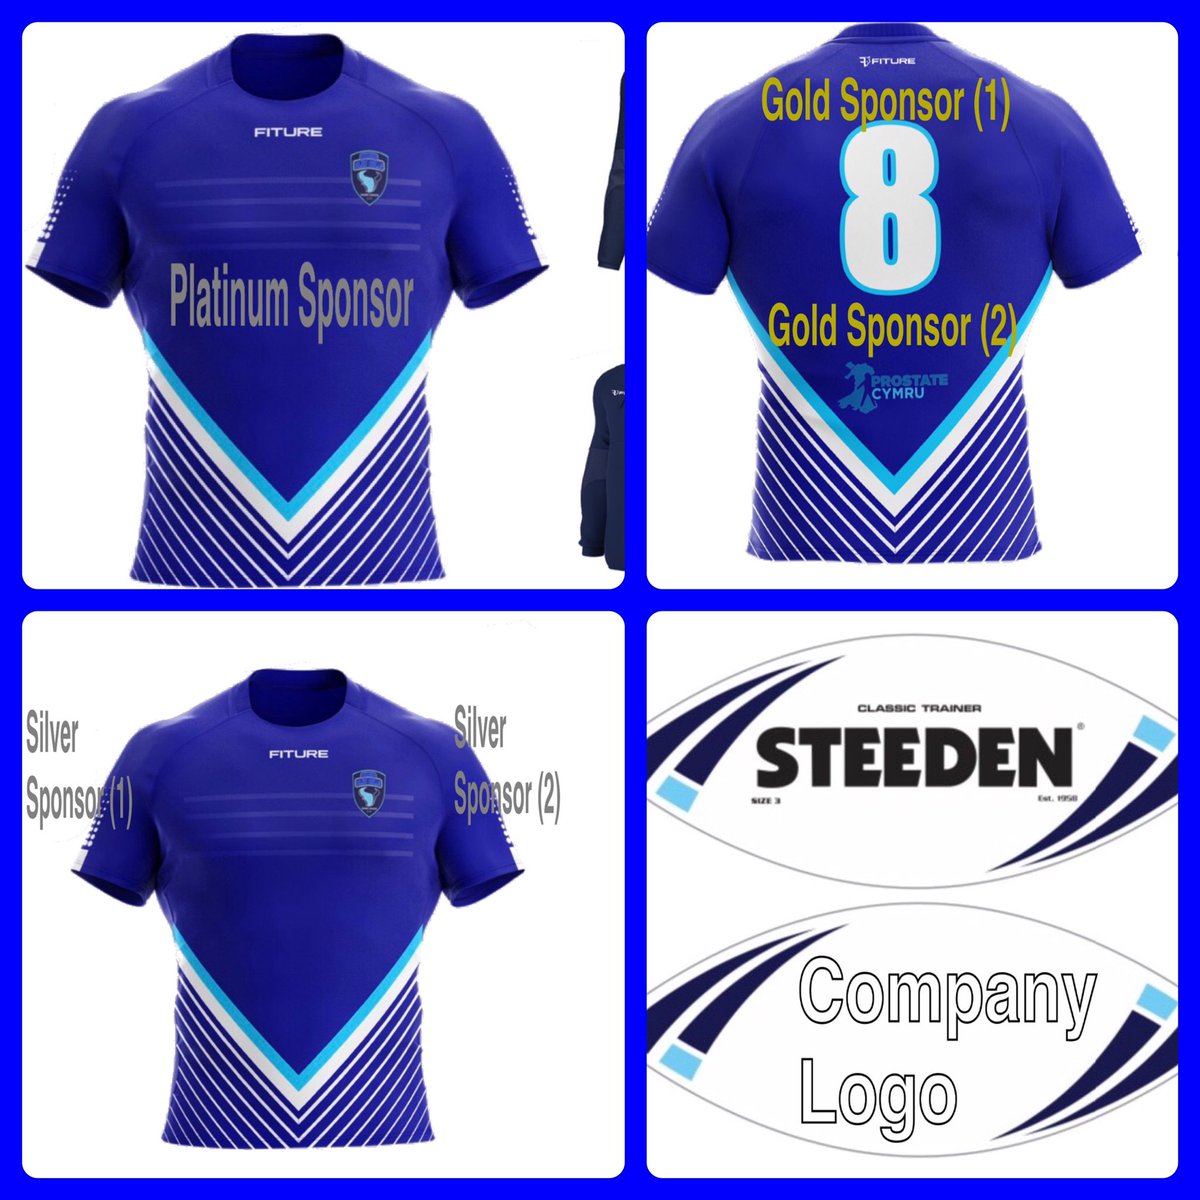 looking for sponsors for kit for the up coming summer season. Great opportunities for companies to build there brand with ours. @budlight @MorganstoneLtd @FletcherMorgan @WattsandMorgan @OptimalClaim @OPPOMobileUK @PorterBridgend @PorttAndCo @rollsroycecars @MillerHomesUK